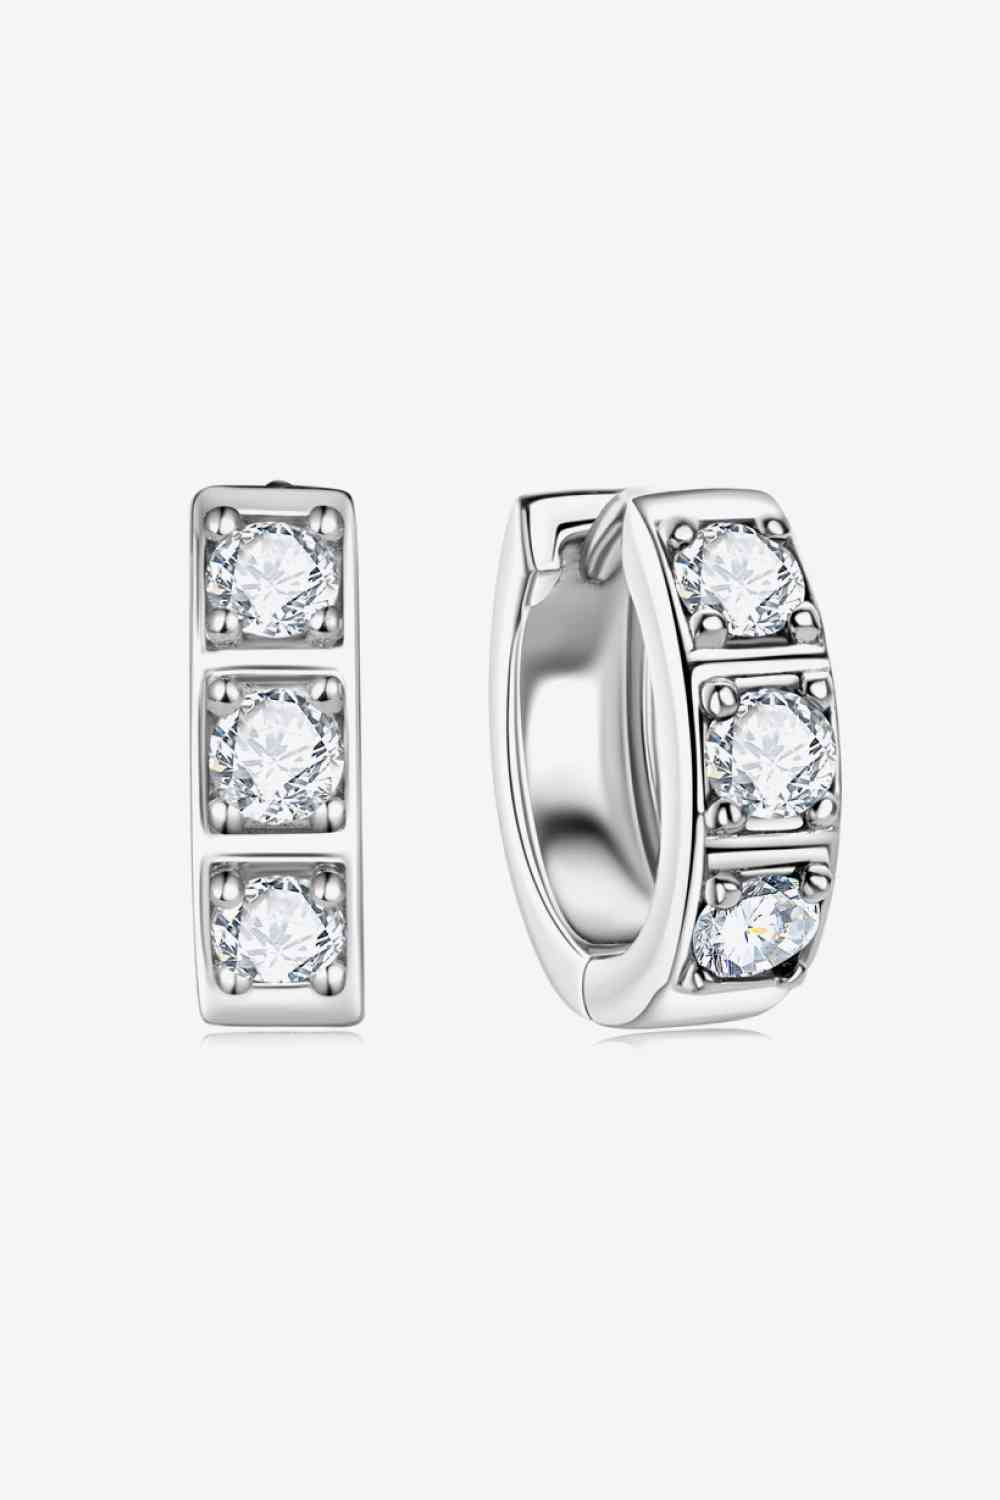 INLAID MOISSANITE HUGGIE EARRINGS in Platinum Plated Sterling Silver and Black or White Moissanite stones